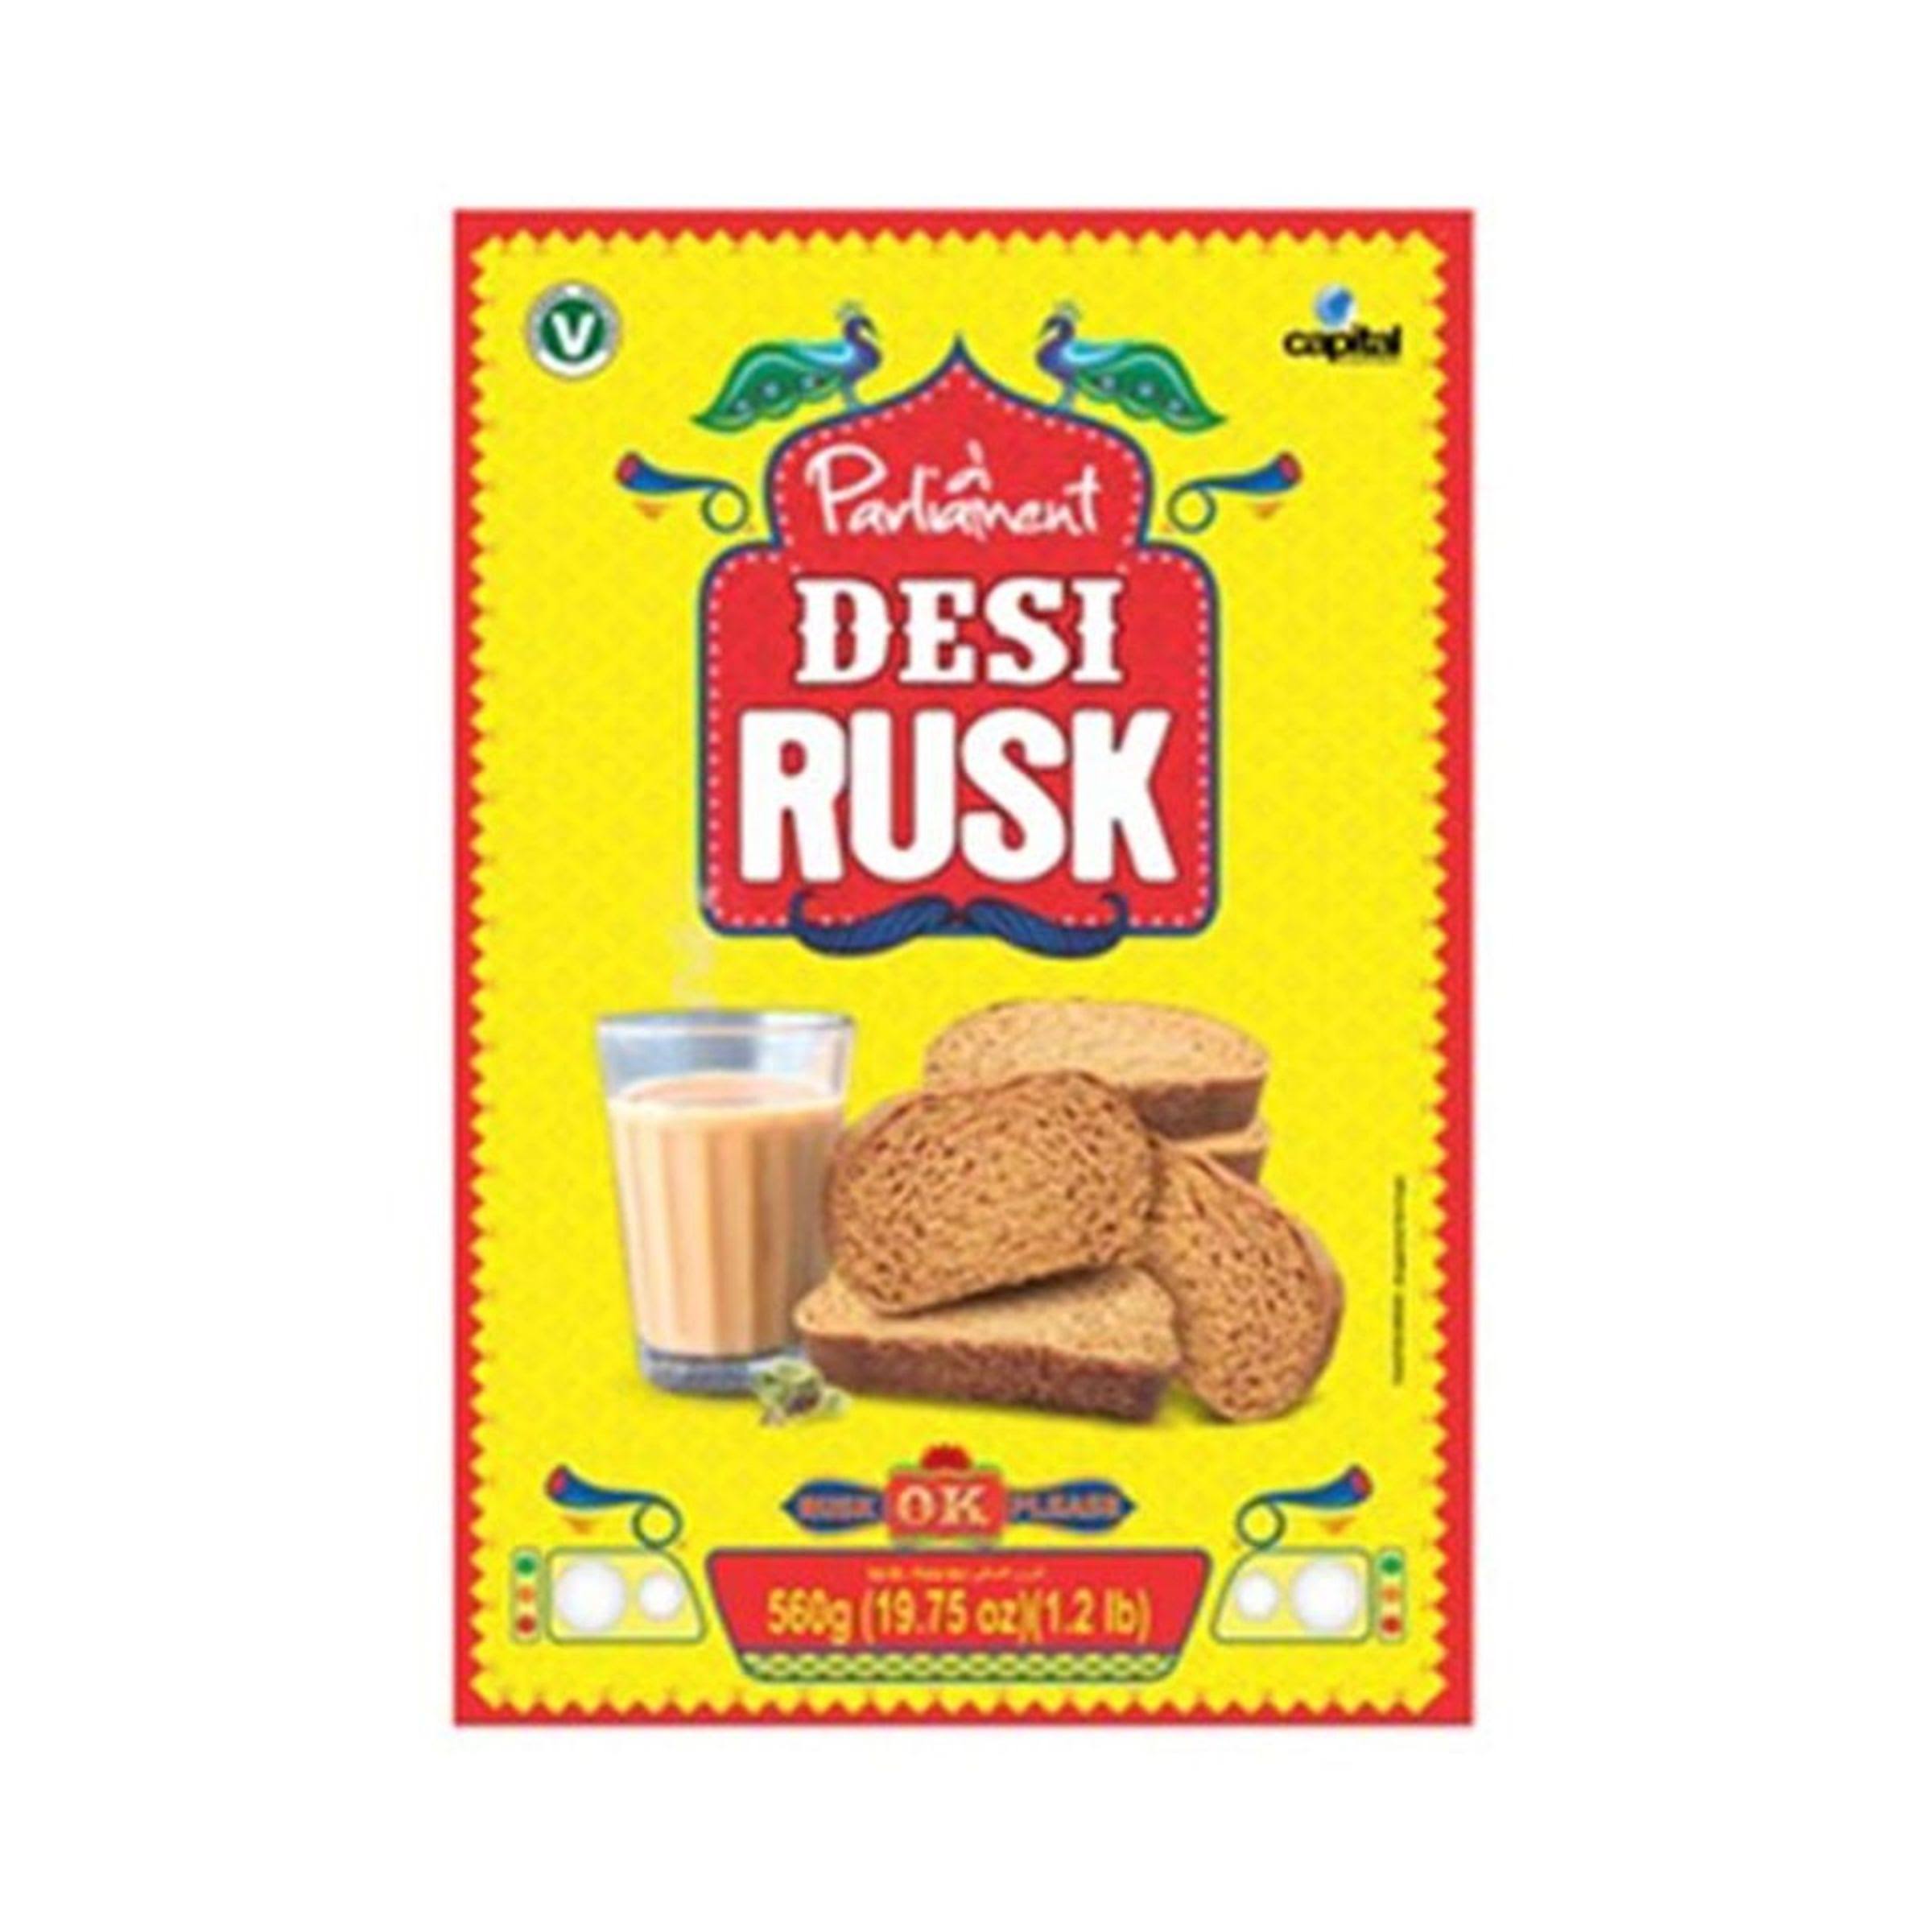 Parliament Desi Rusk - 560 Grams - Mayuri Foods - Delivered by Mercato